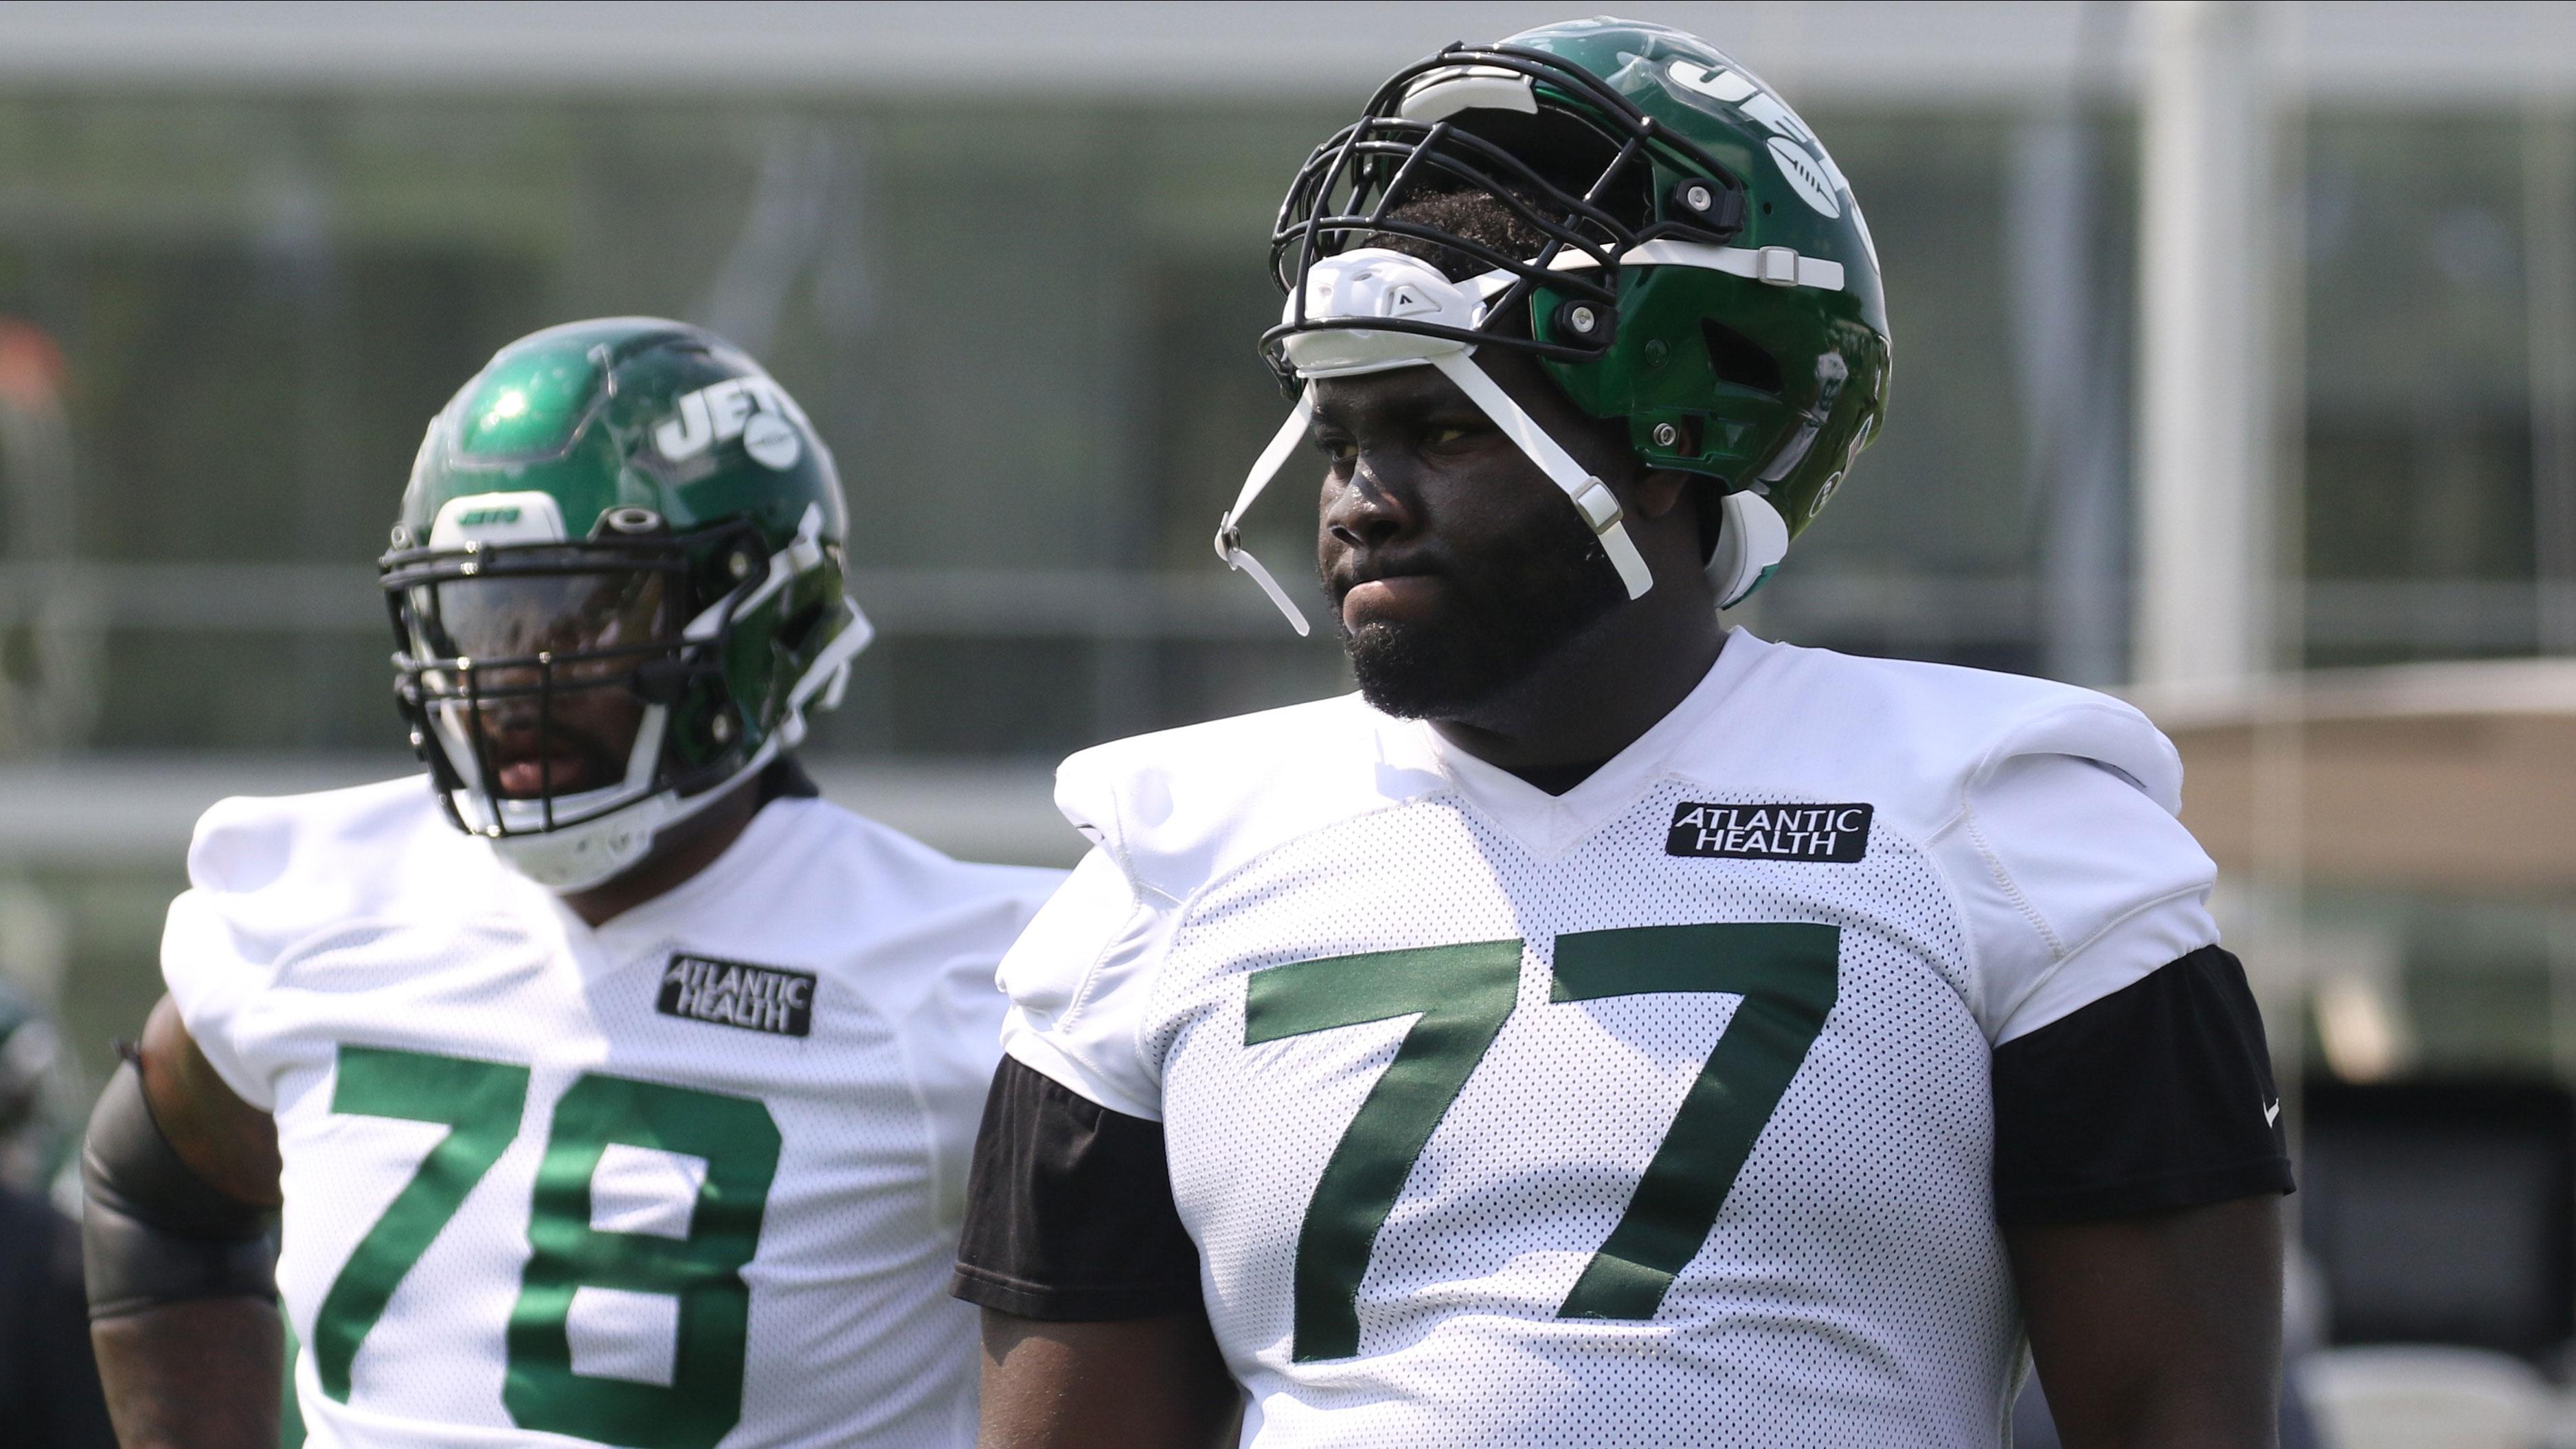 Jul 28, 2021; Florham Park, NJ, USA; Offensive linemen Morgan Moses and Mekhi Becton during drills as the New York Jets hold their first practice of training camp at their practice facility in Florham Park, NJ on July 28, 2021. / NorthJersey.com-USA TODAY NETWORK